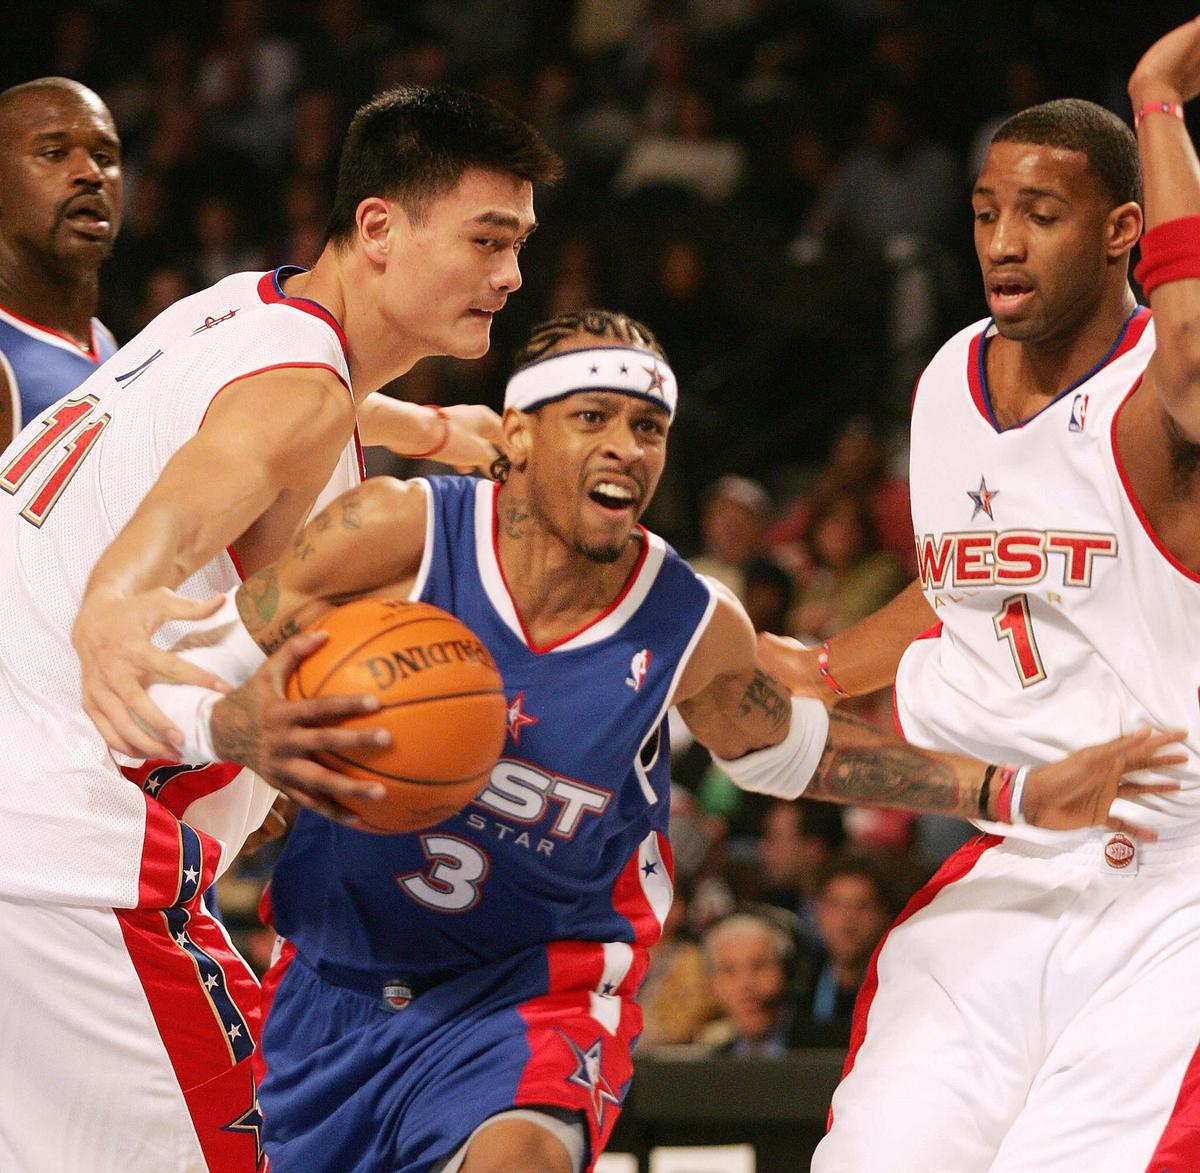 China's Yao Ming (L) of the Western Conference team defends against Allen Iverson (C) of the Eastern Conference as the West's Tracy McGrady (R) and the East's Shaquille O'Neal (far L) look on during the NBA All-Star game in Denver, Colorado on Feb. 20, 2005. Iverson was named Most Valuable Player (MVP) of the game as the East won 125-115. (Don Emmert/AFP/Getty Images)